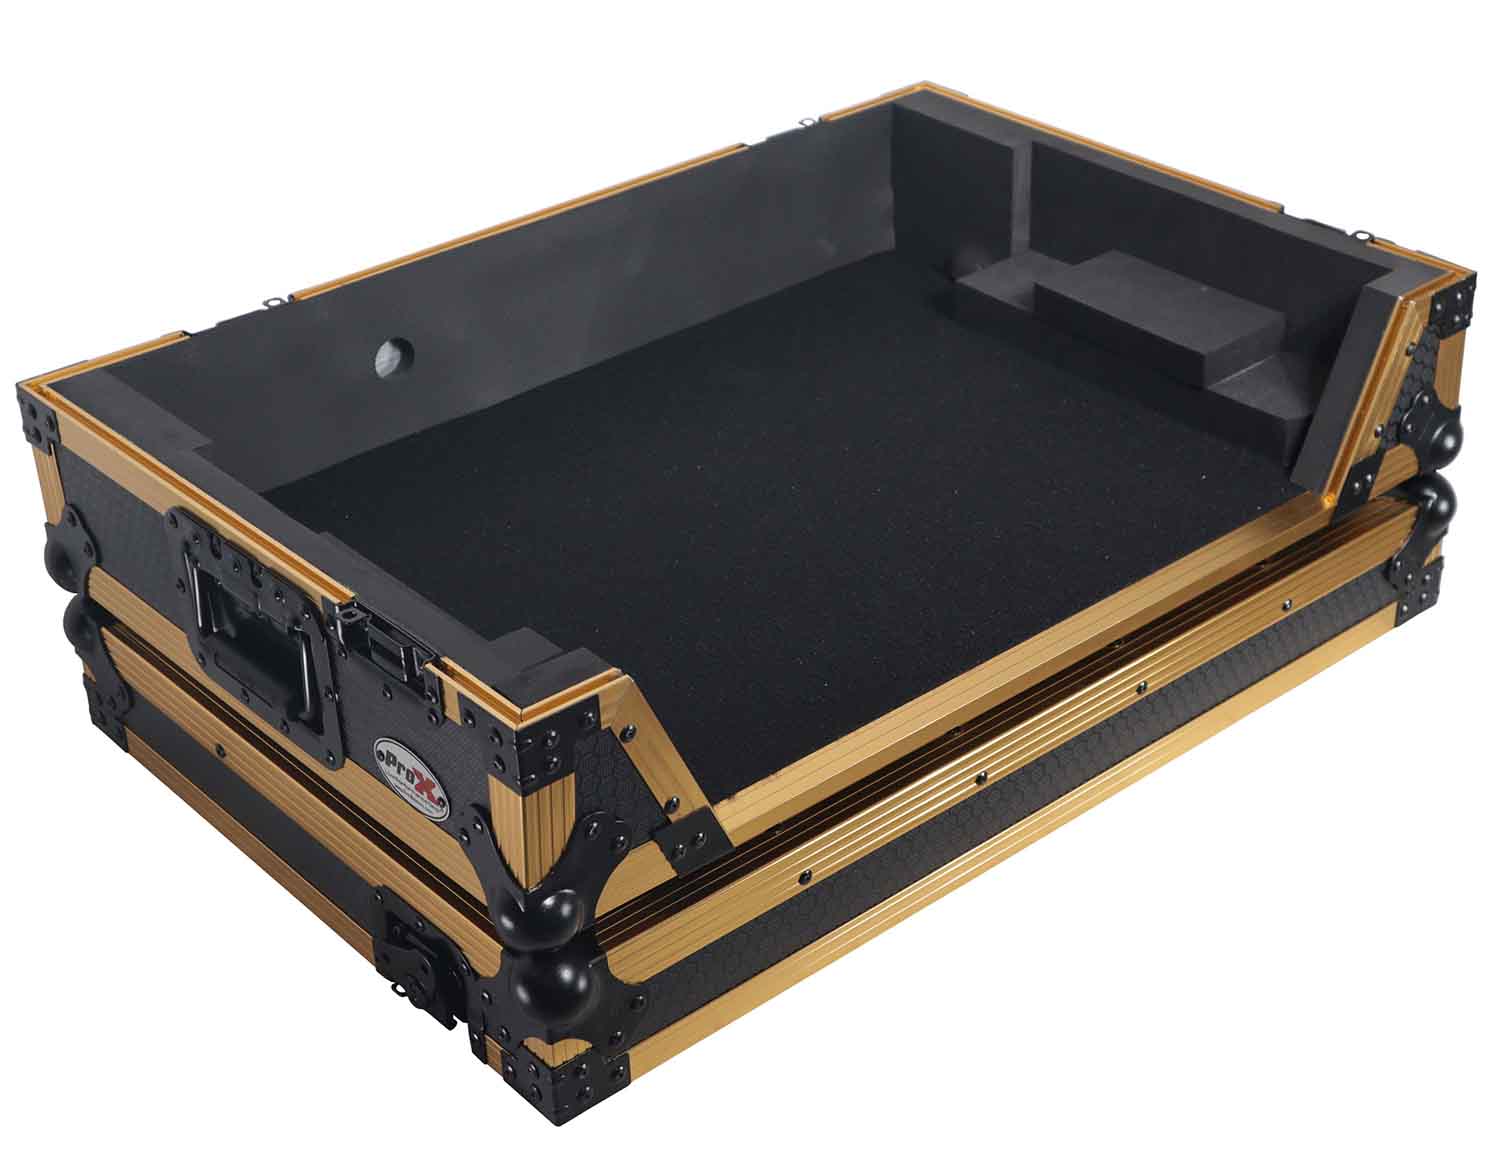 B-Stock: ProX XS-RANEONE W FGLD ATA Flight Style Road Case for RANE ONE DJ Controller with Wheels Limited Edition Gold - Hollywood DJ